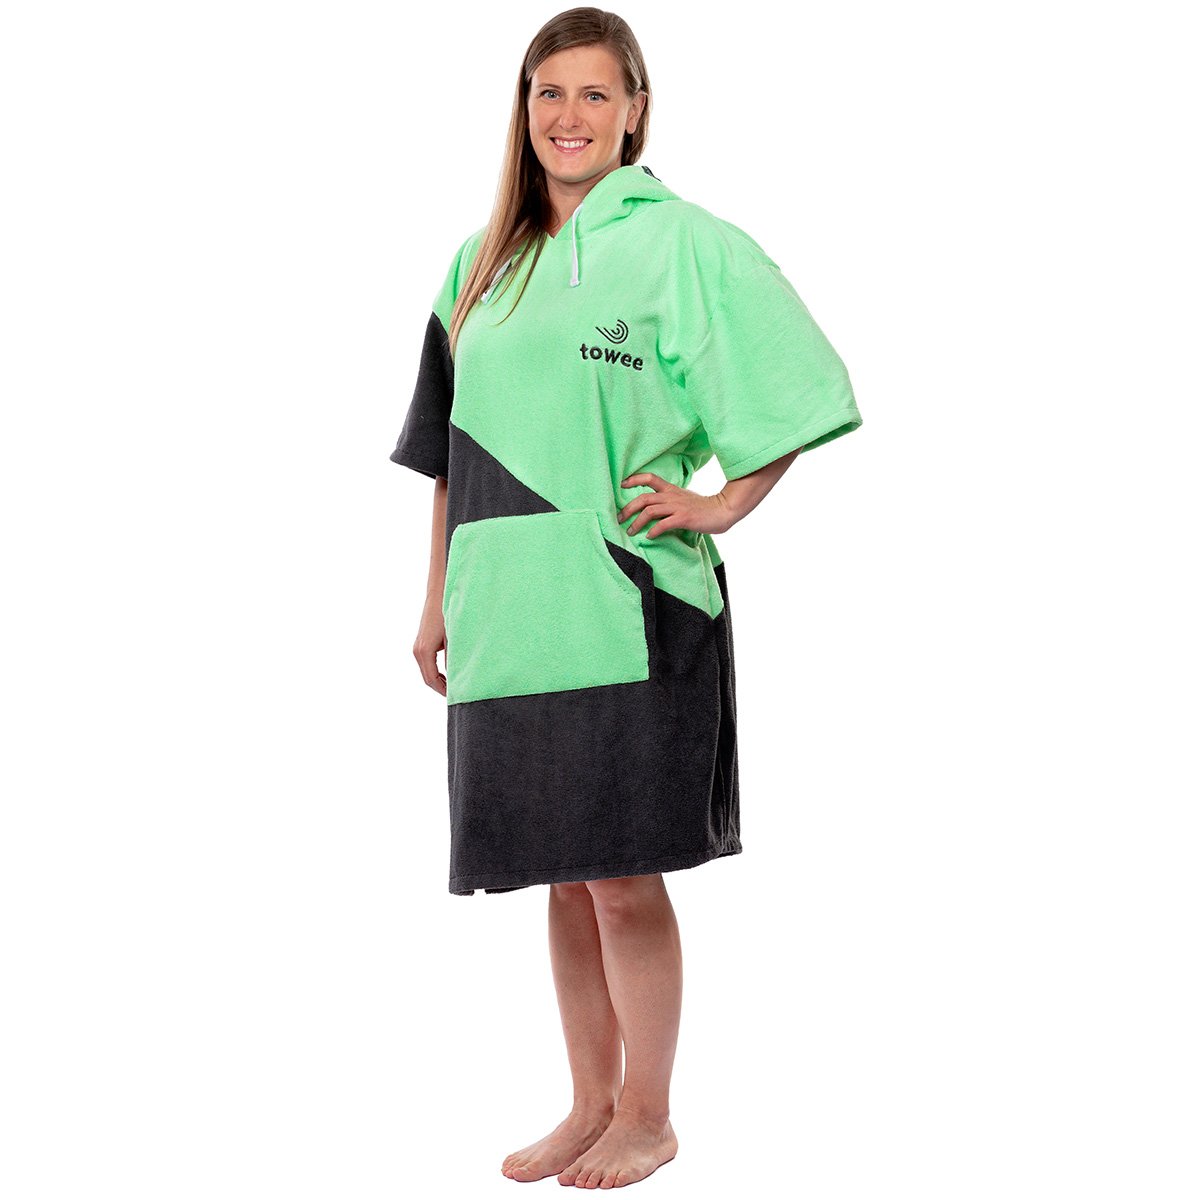 Surf poncho Double green, 70 x 100 cm